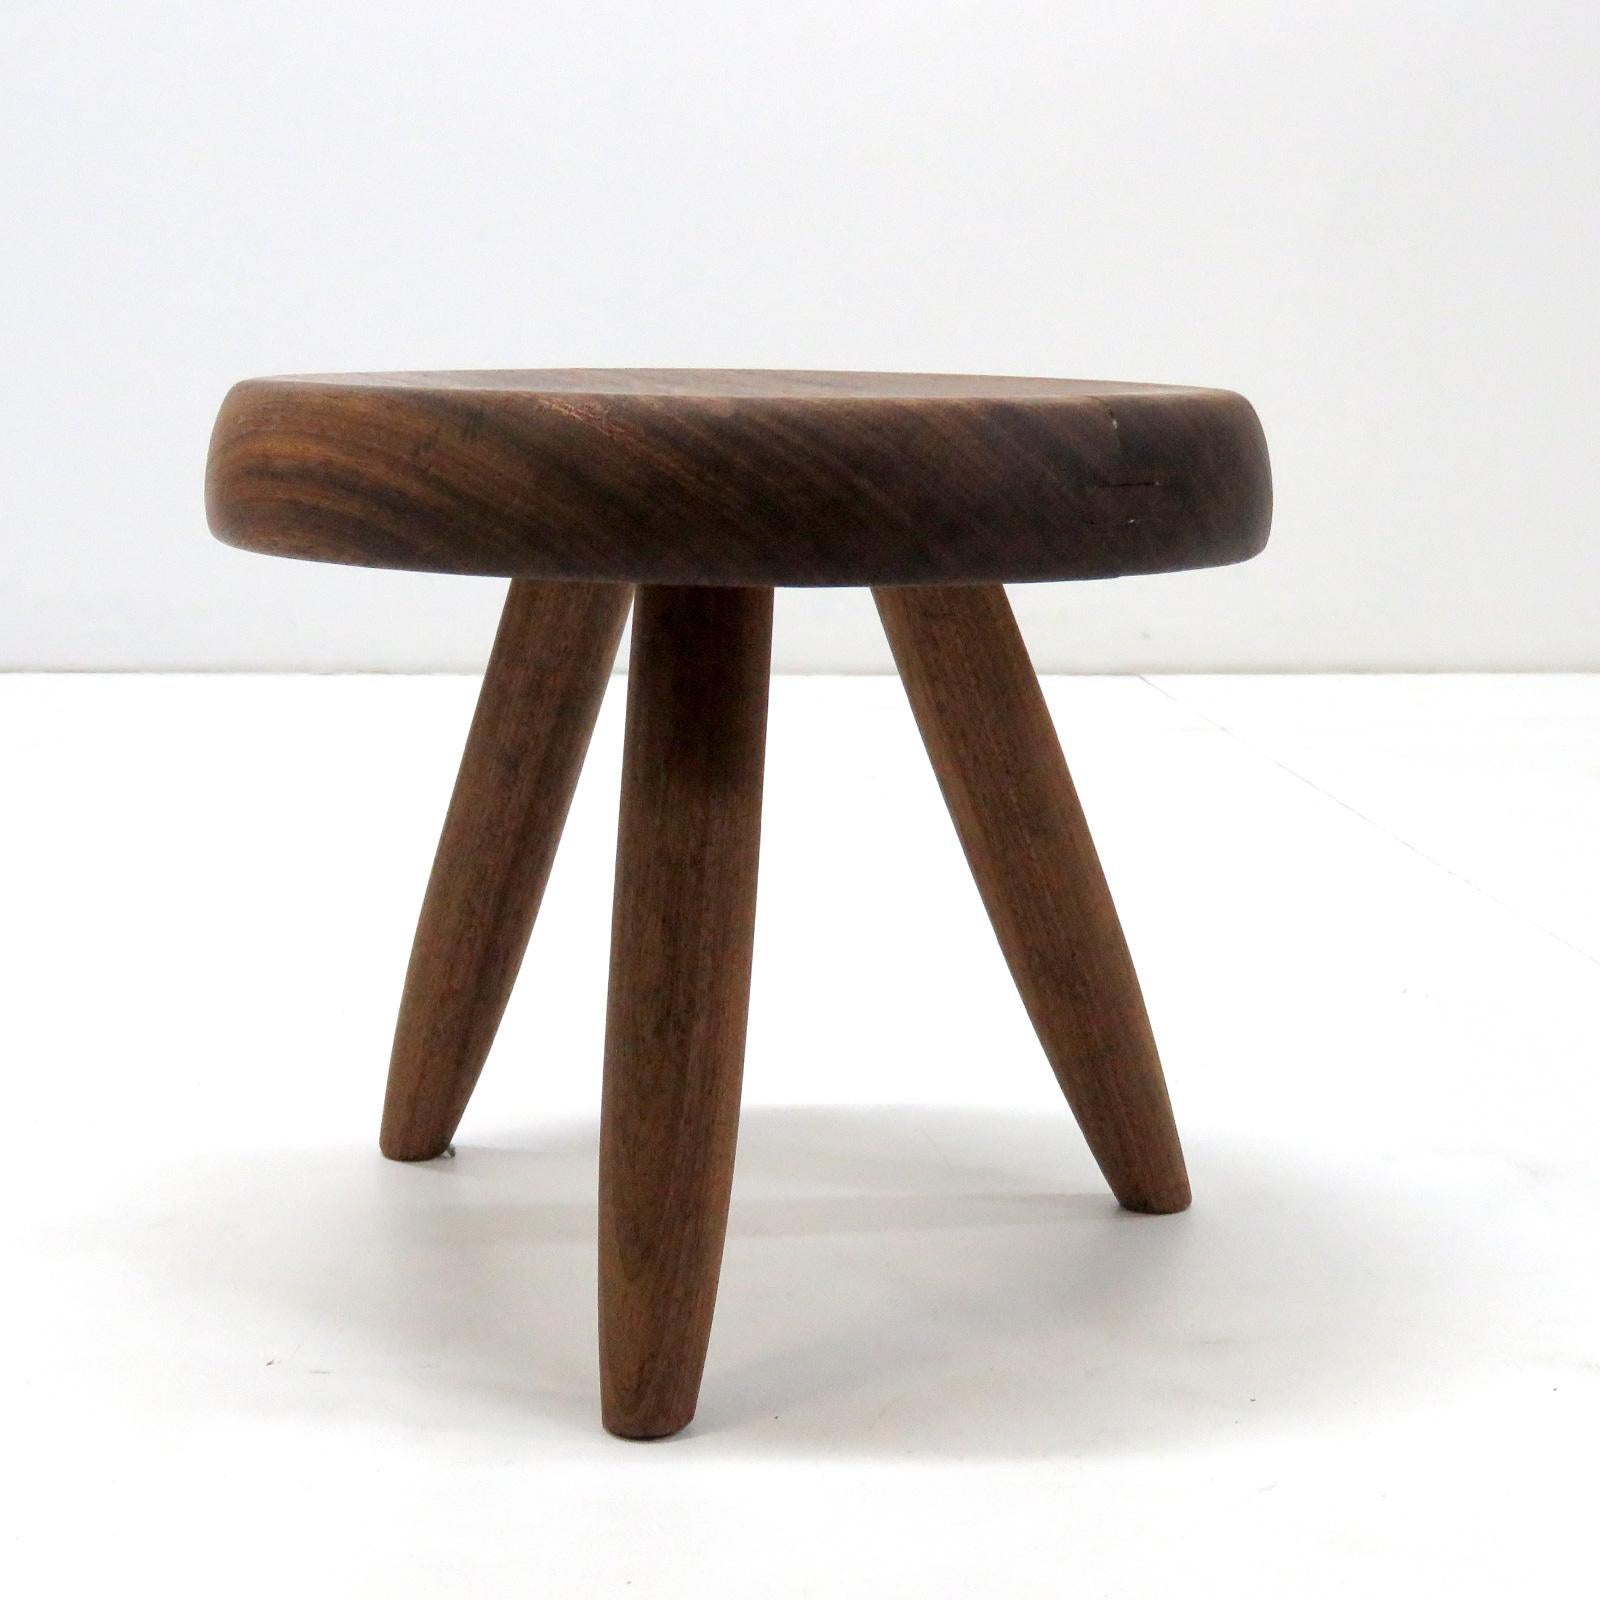 Wonderful wooden stool 'Berger', designed by Charlotte Perriand, distributed by Steph Simon made with the typical Perriand connection on its tripod base.